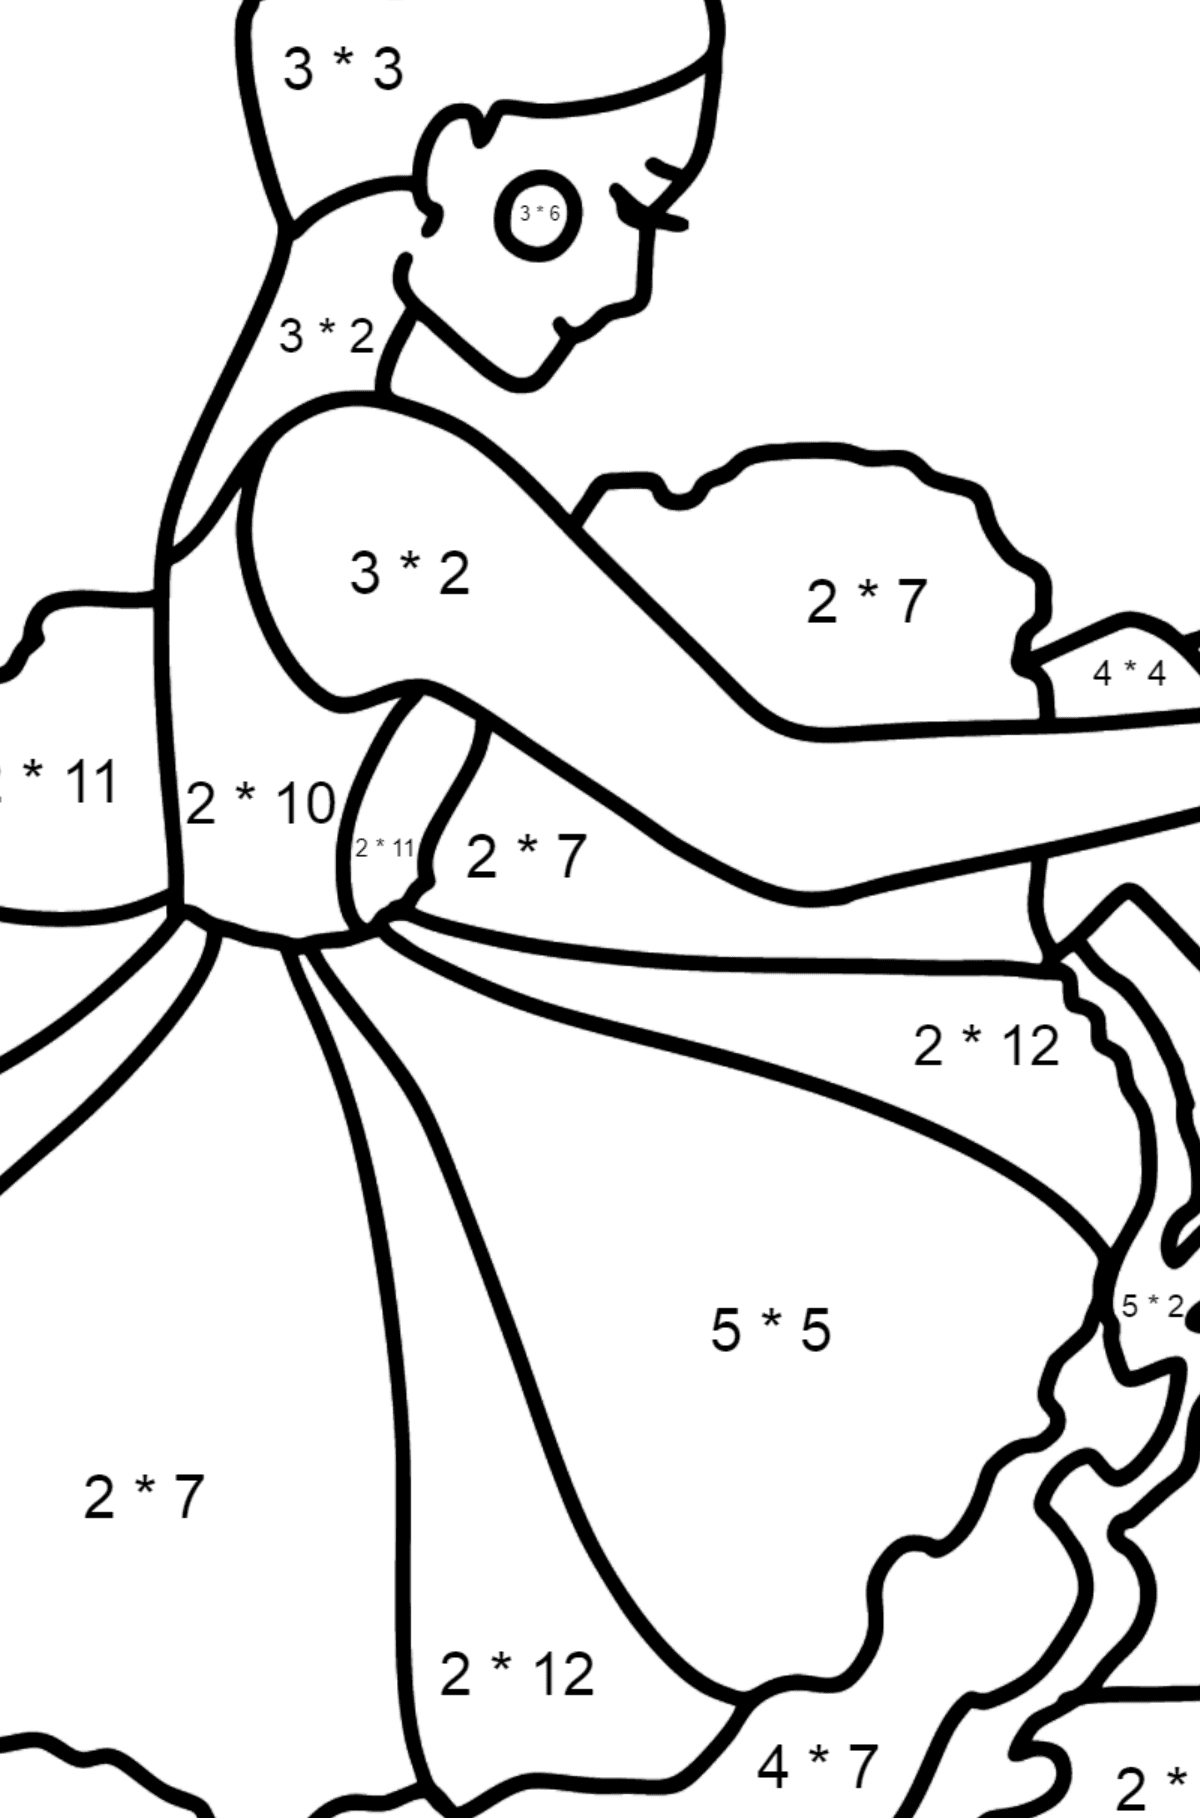 Ballerina in a Lush Dress coloring page - Math Coloring - Multiplication for Kids